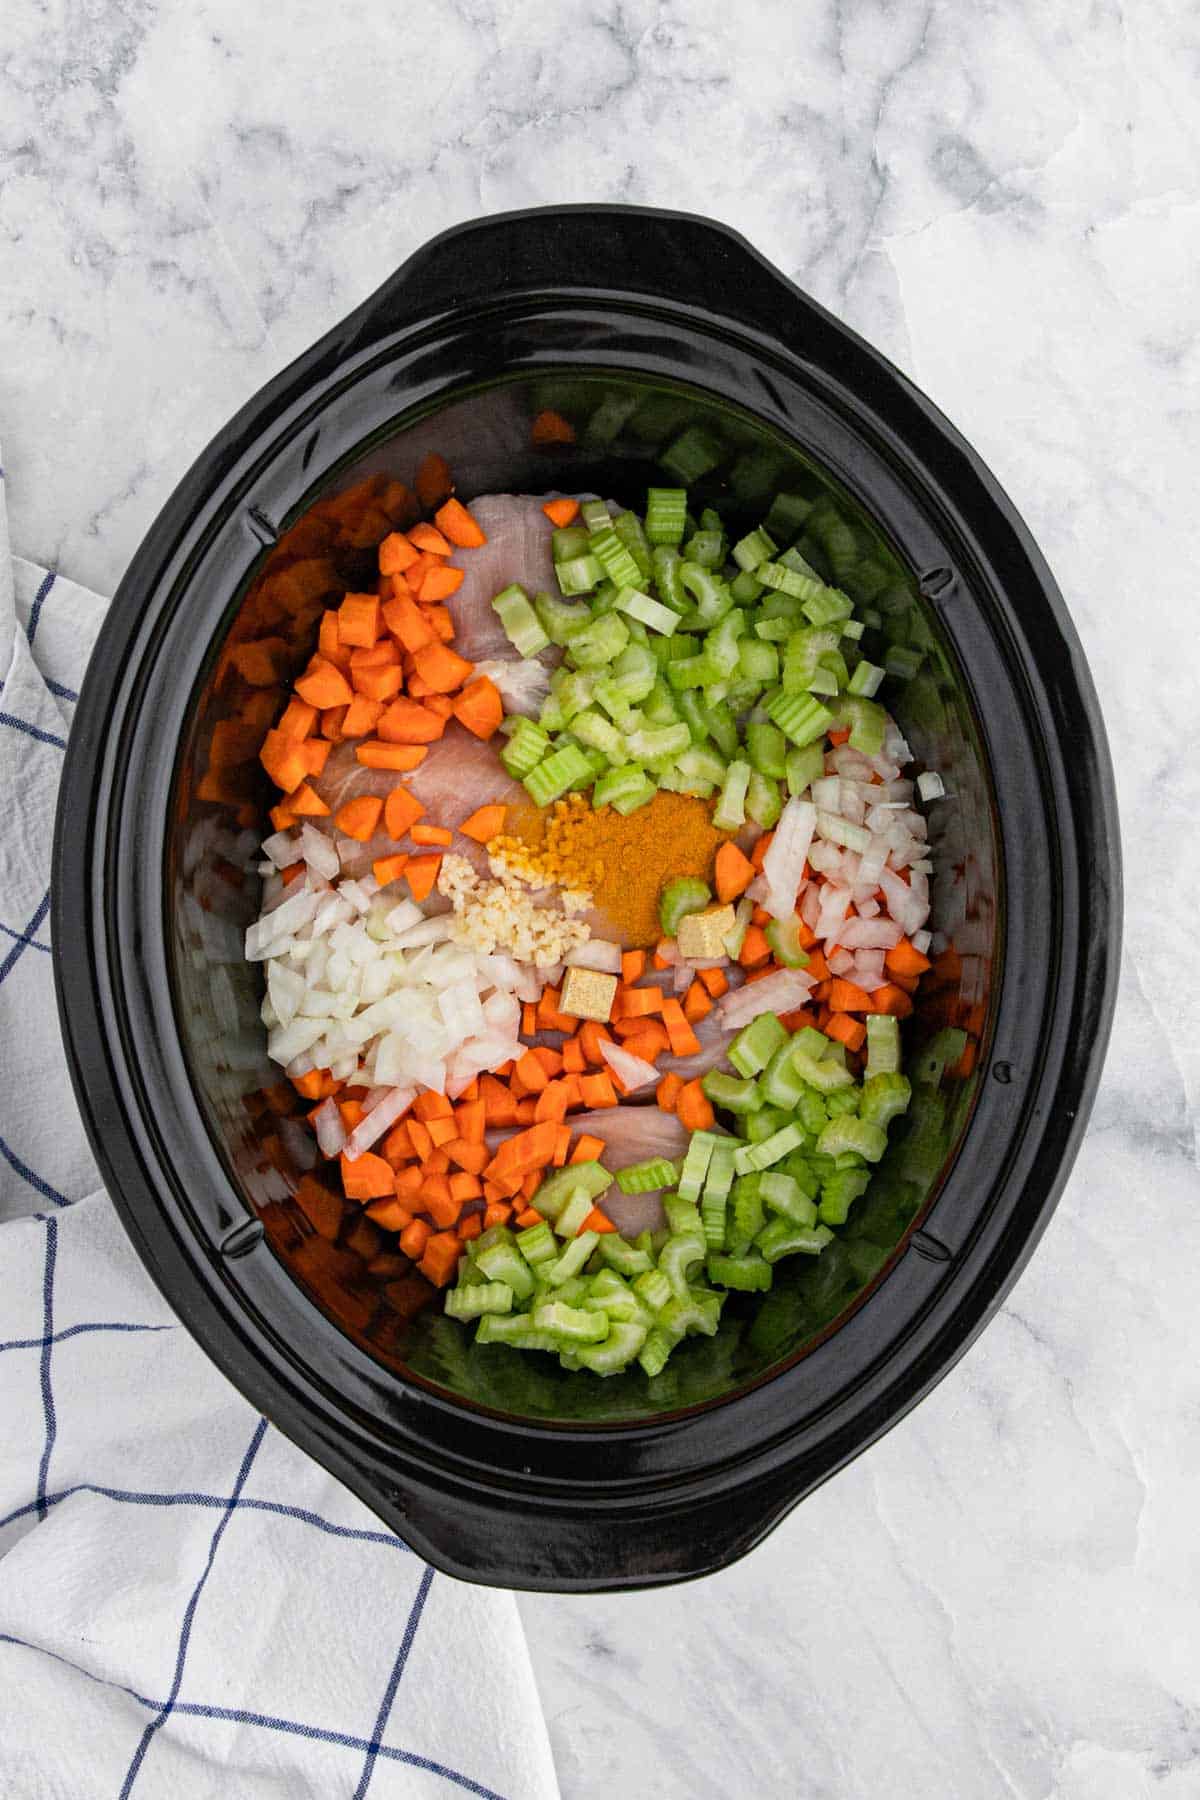 Veggies and spices added to the crockpot along with chicken breasts.